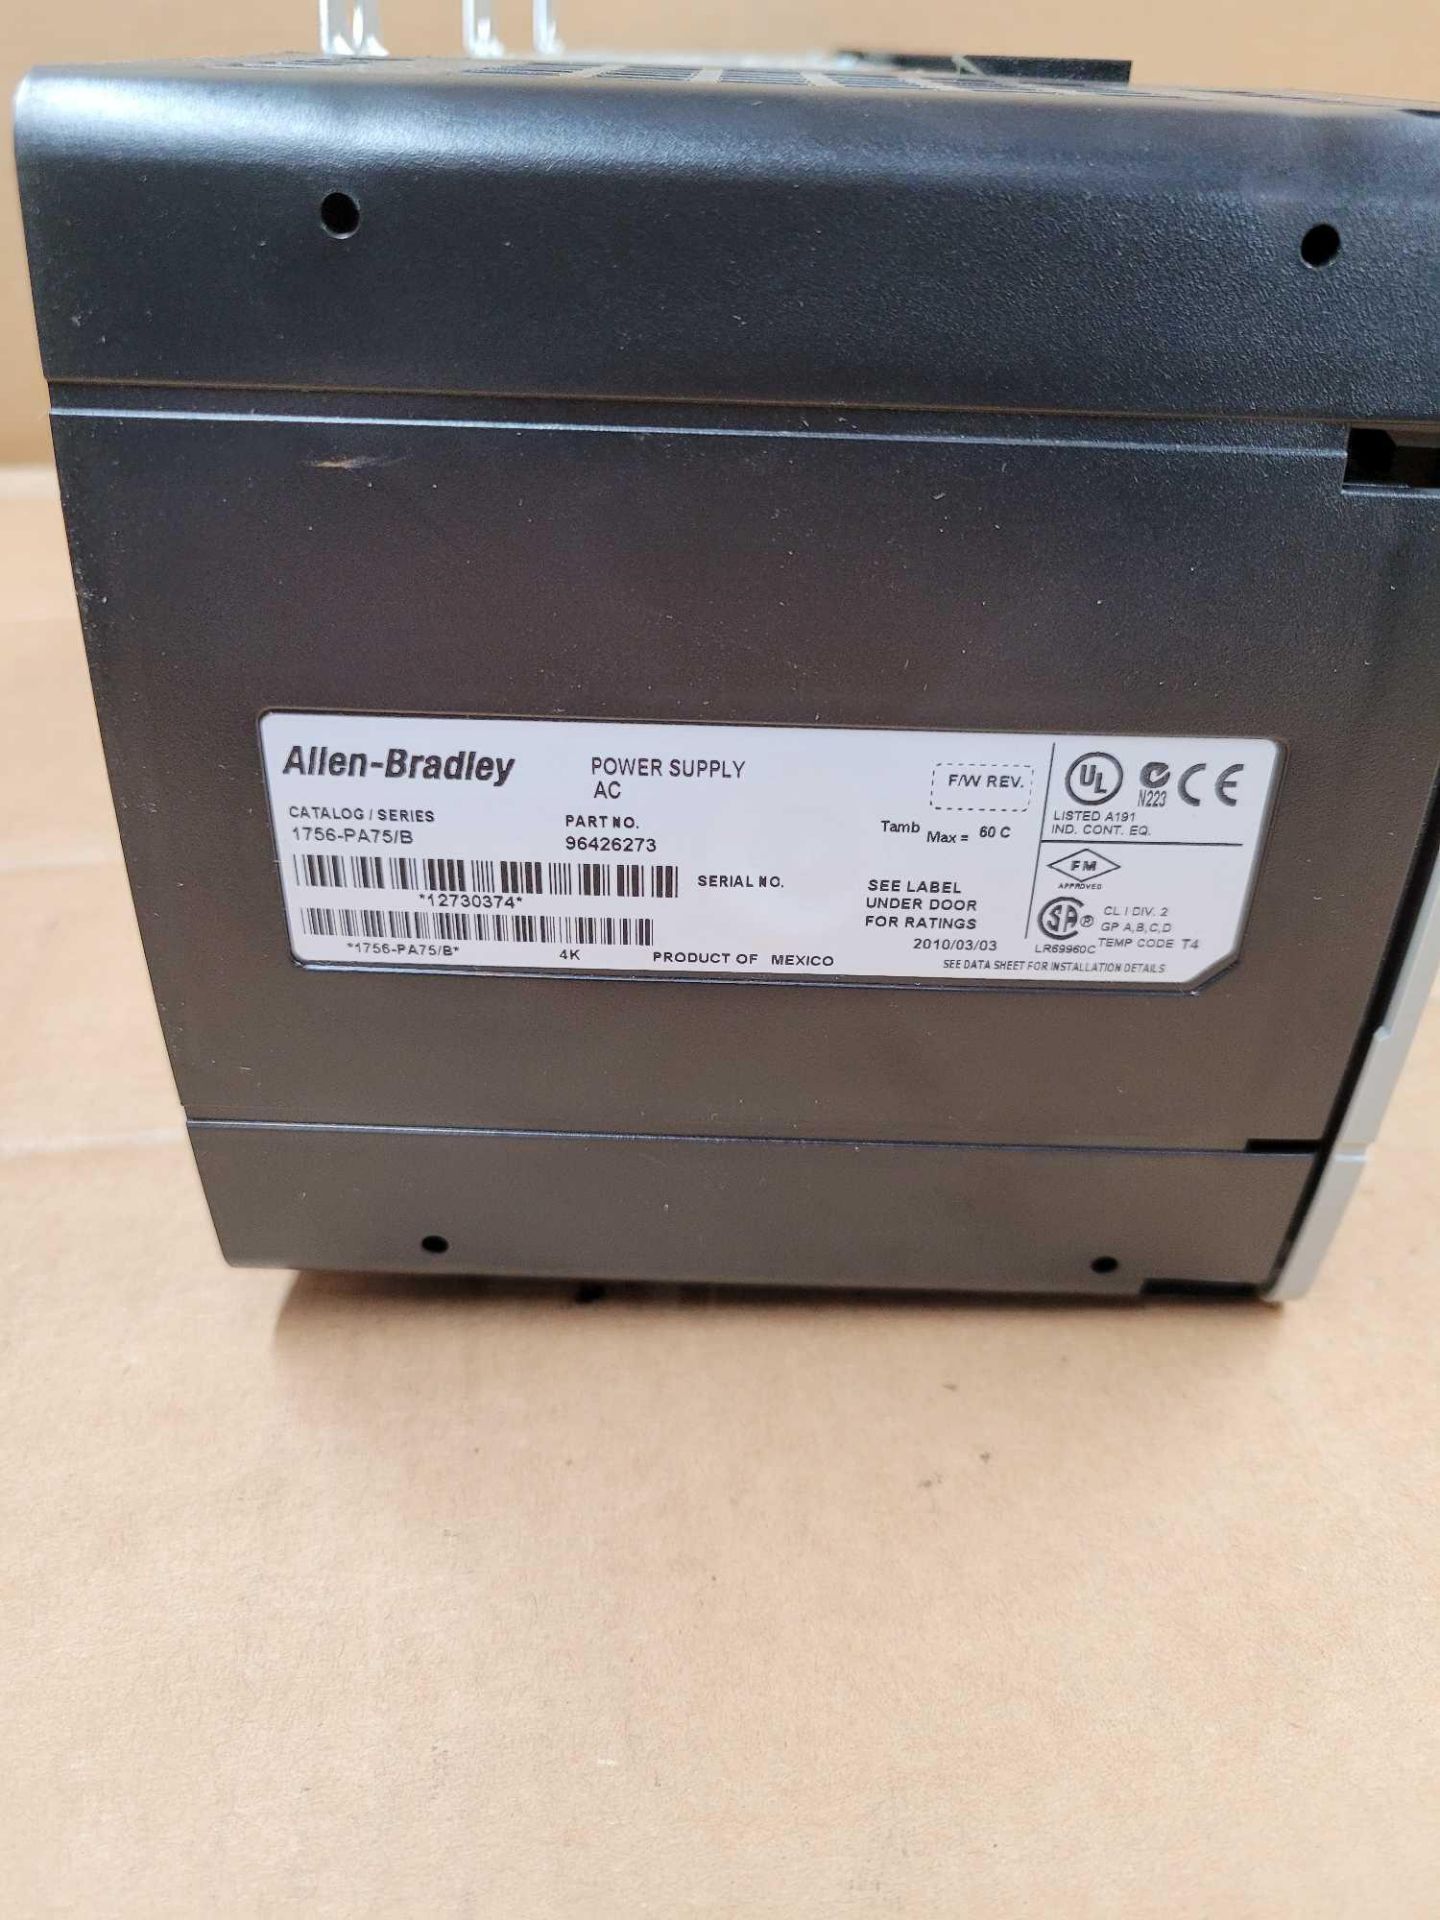 ALLEN BRADLEY 1756-PA75/B with 1756-A10  /  Series B Power Supply with Series B 10 Slot Chassis  / - Image 11 of 12